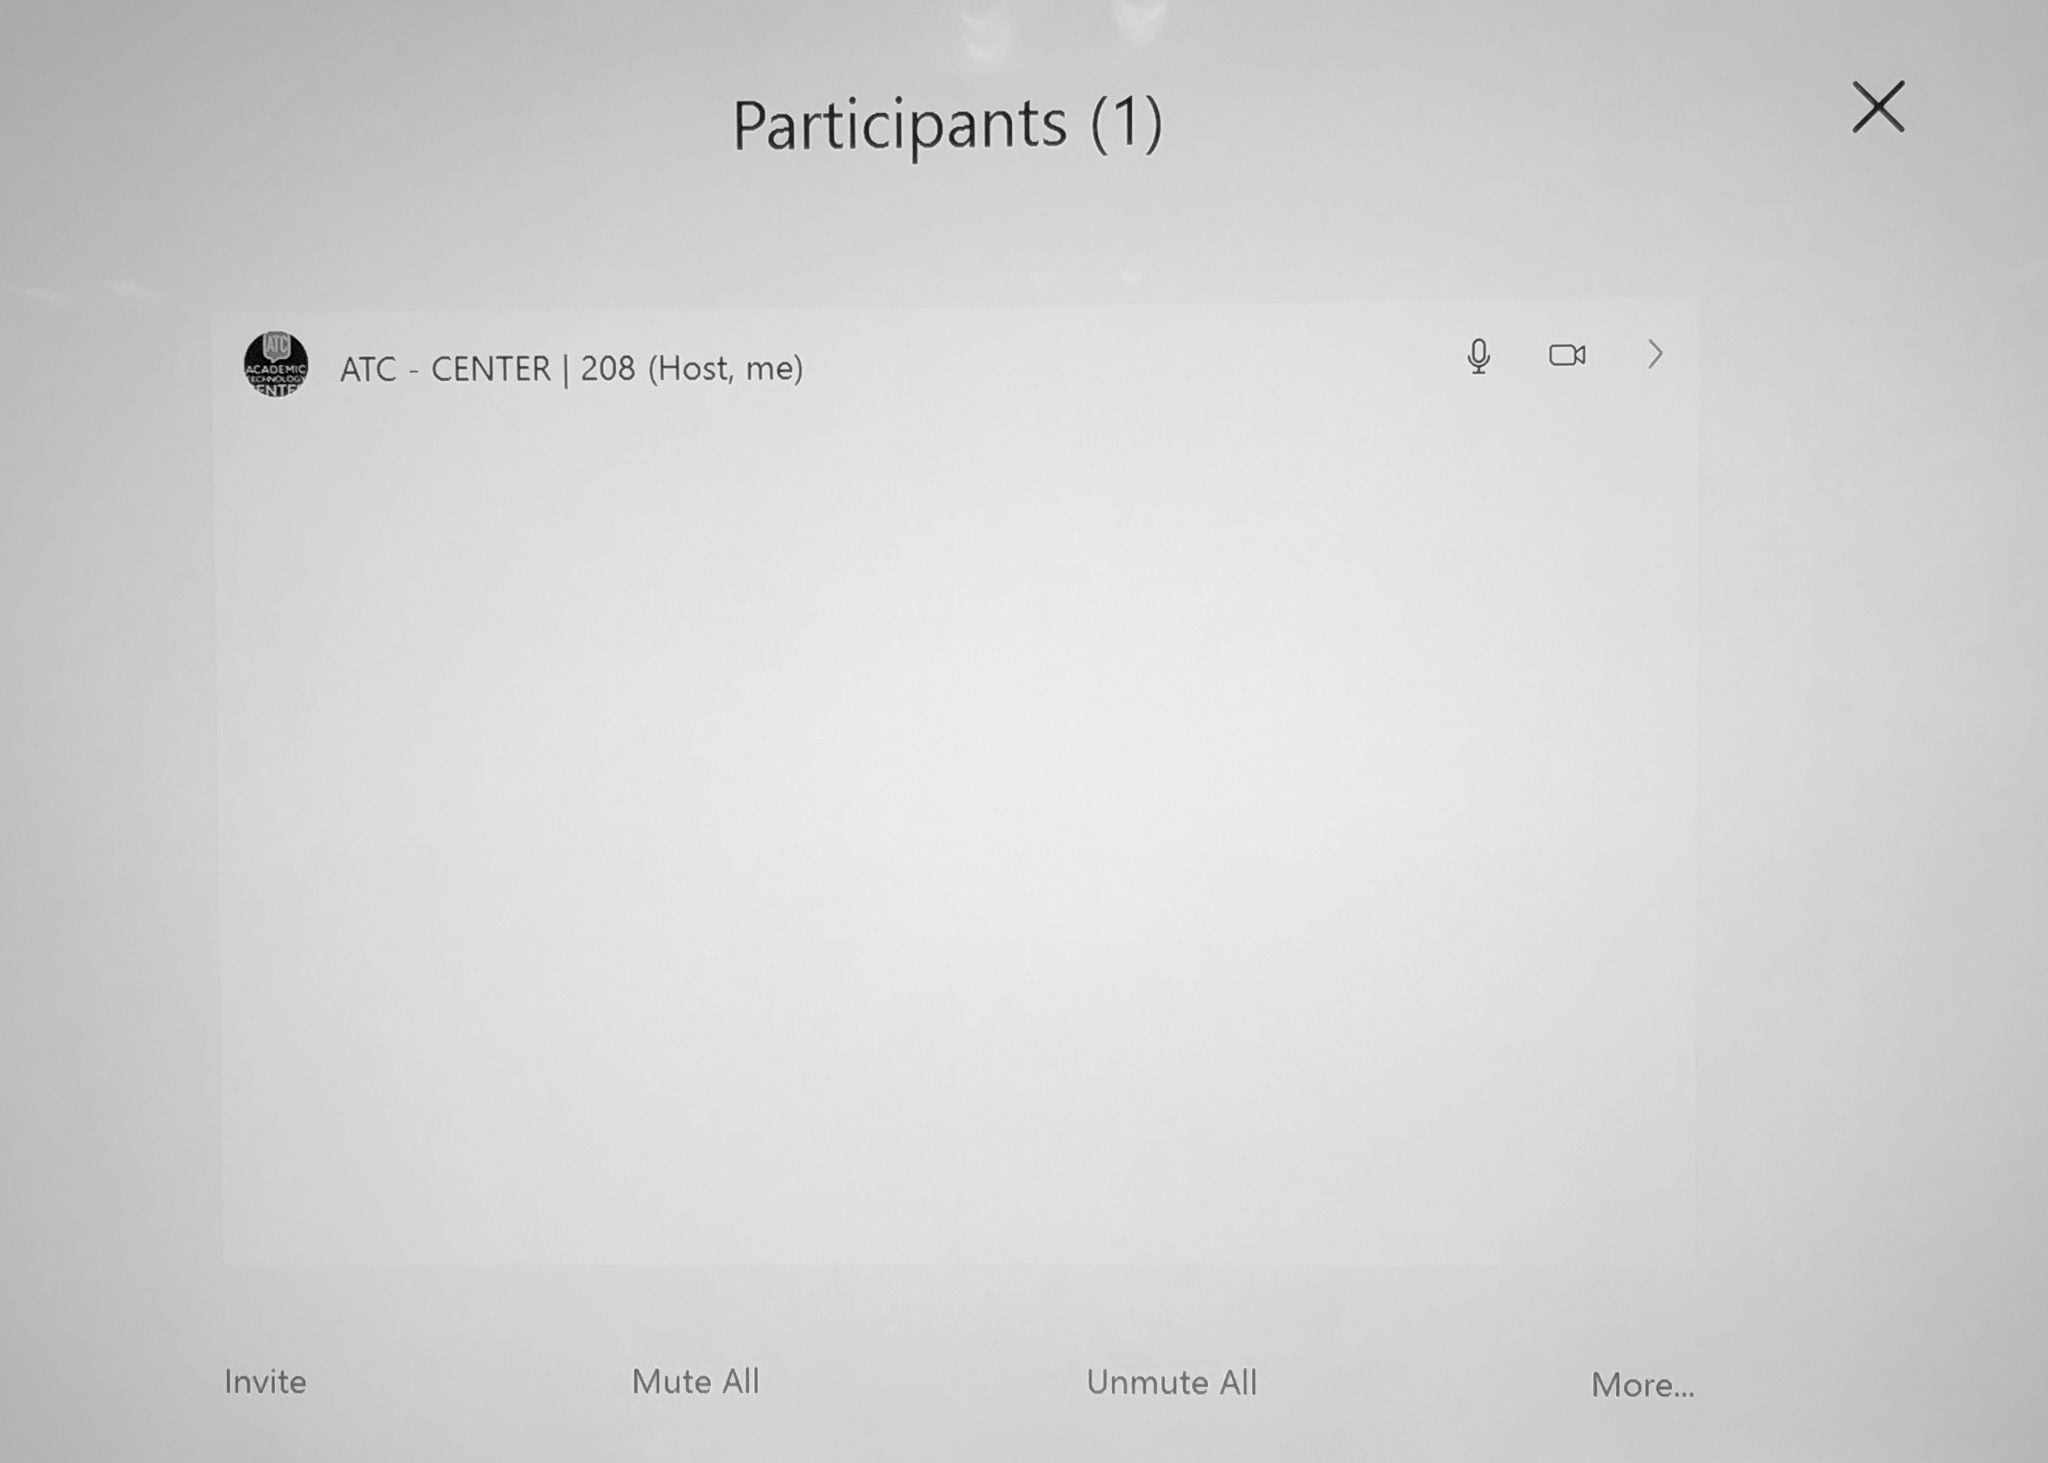 Manage participants screen with only one participant shown in the meeting.